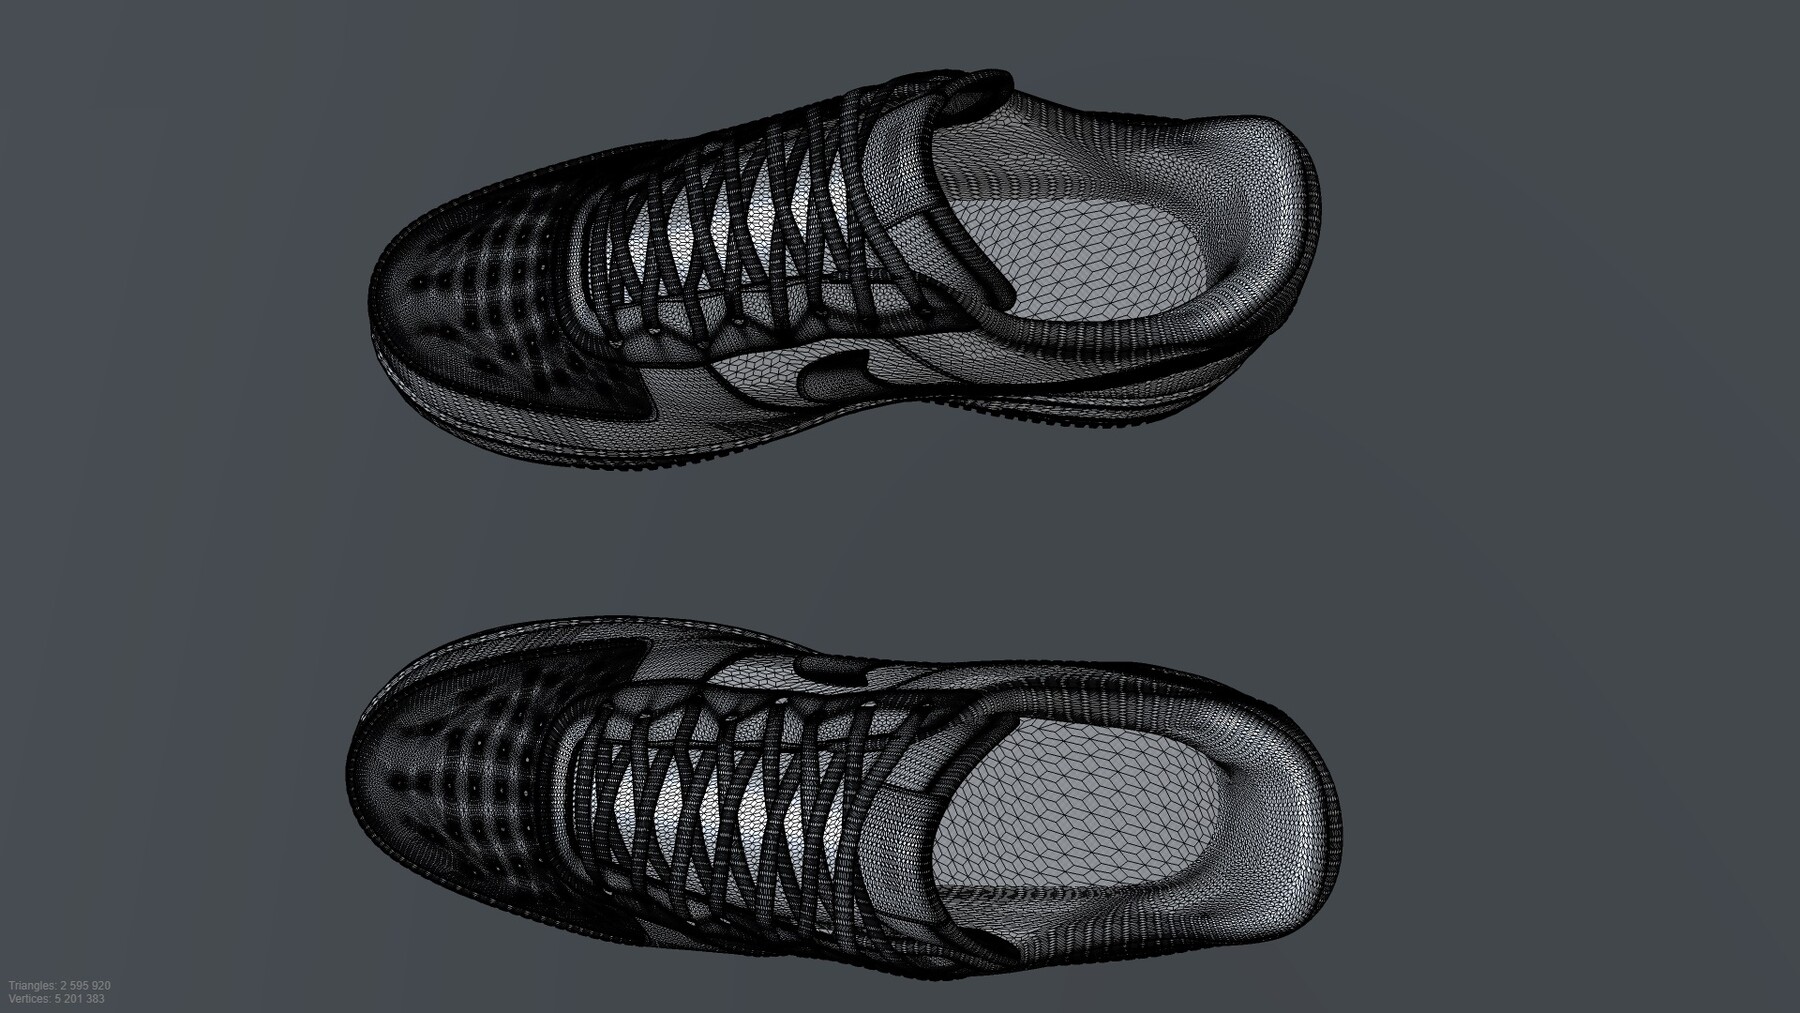 ArtStation - NIKE AIR FORCE 1 SHOES low-poly PBR | Game Assets